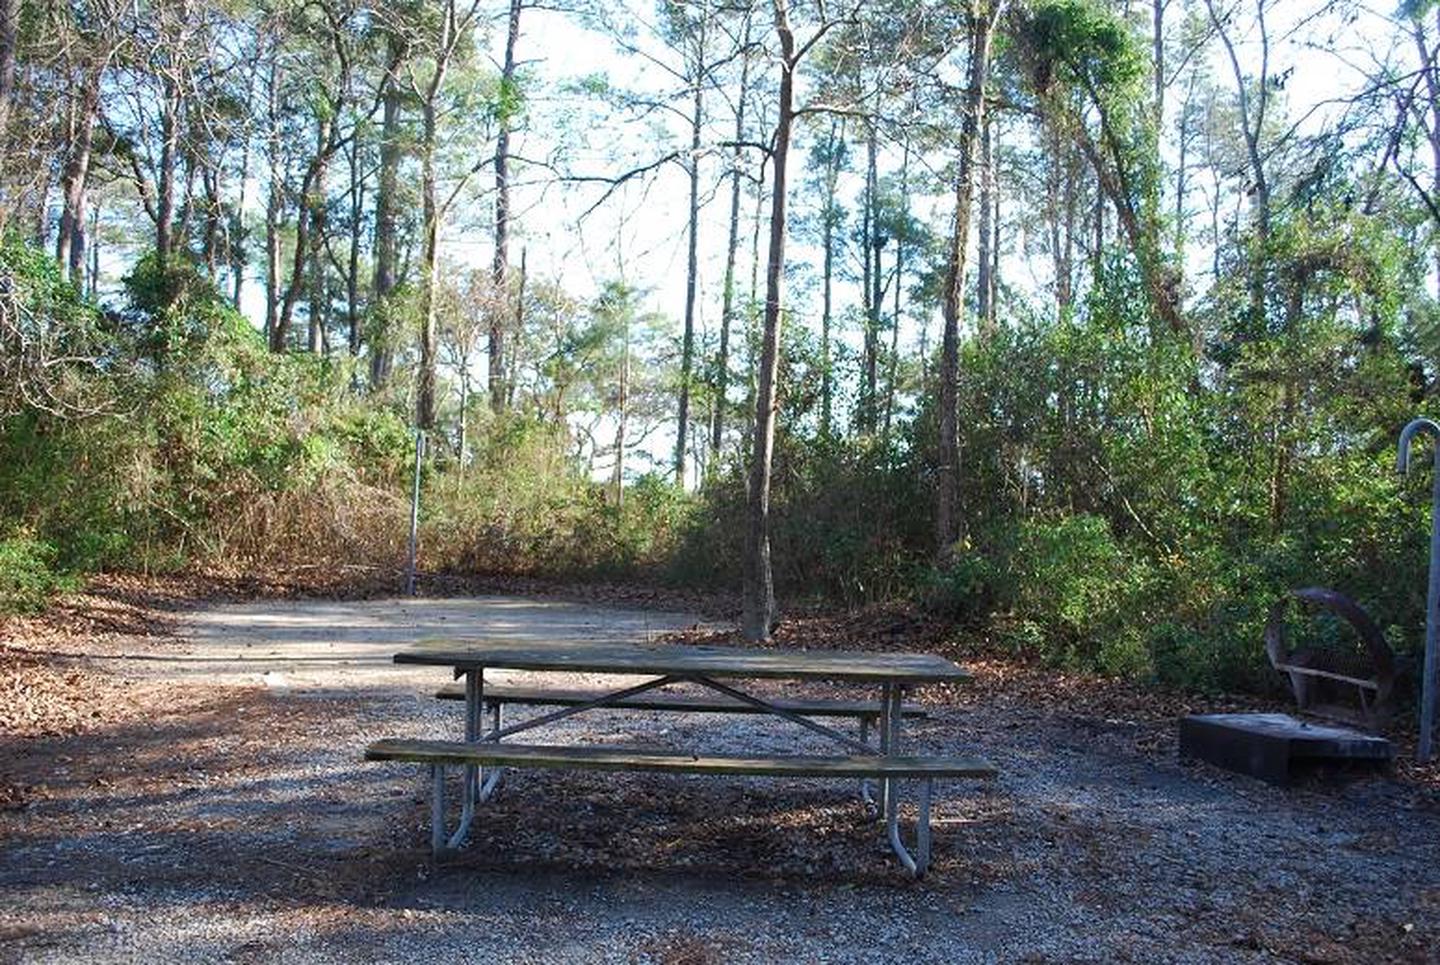 Oyster Point Campground Site #11Basic Site - Camp pad, picnic table, fire ring, and lantern post